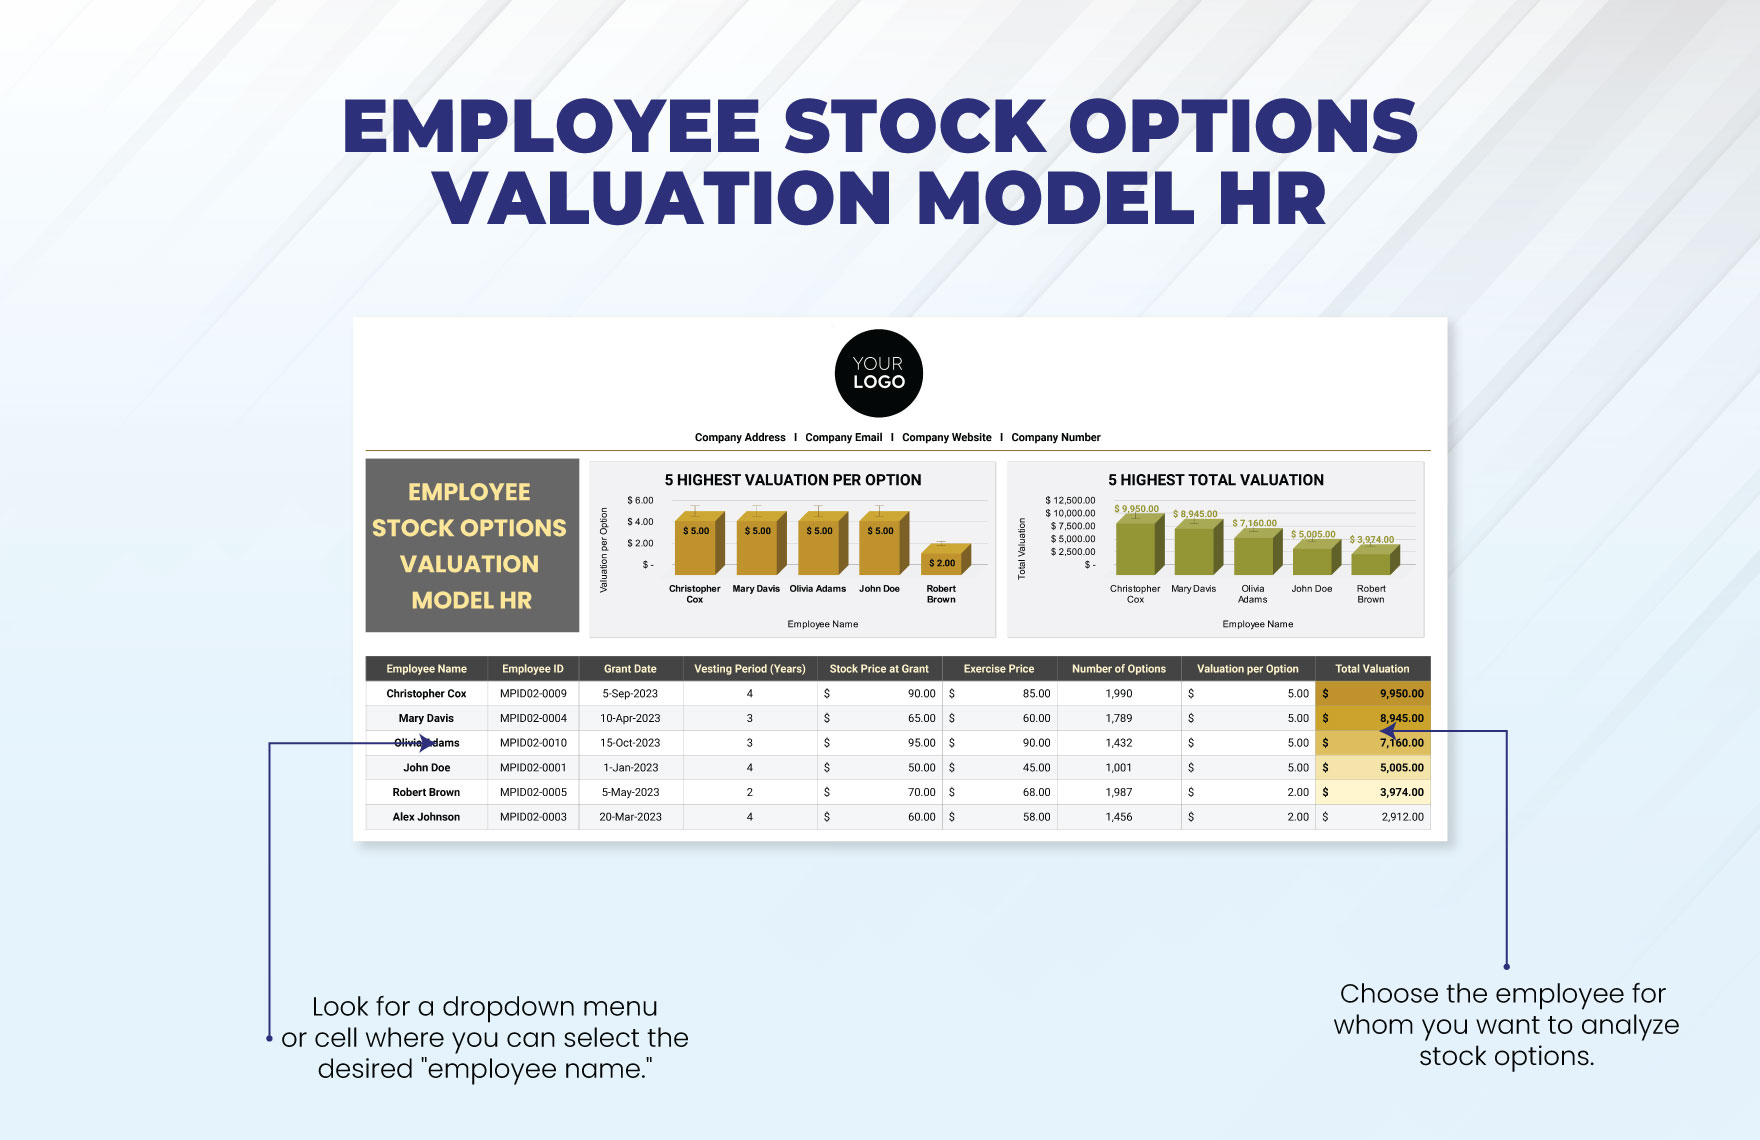 Employee Stock Options Valuation Model HR Template